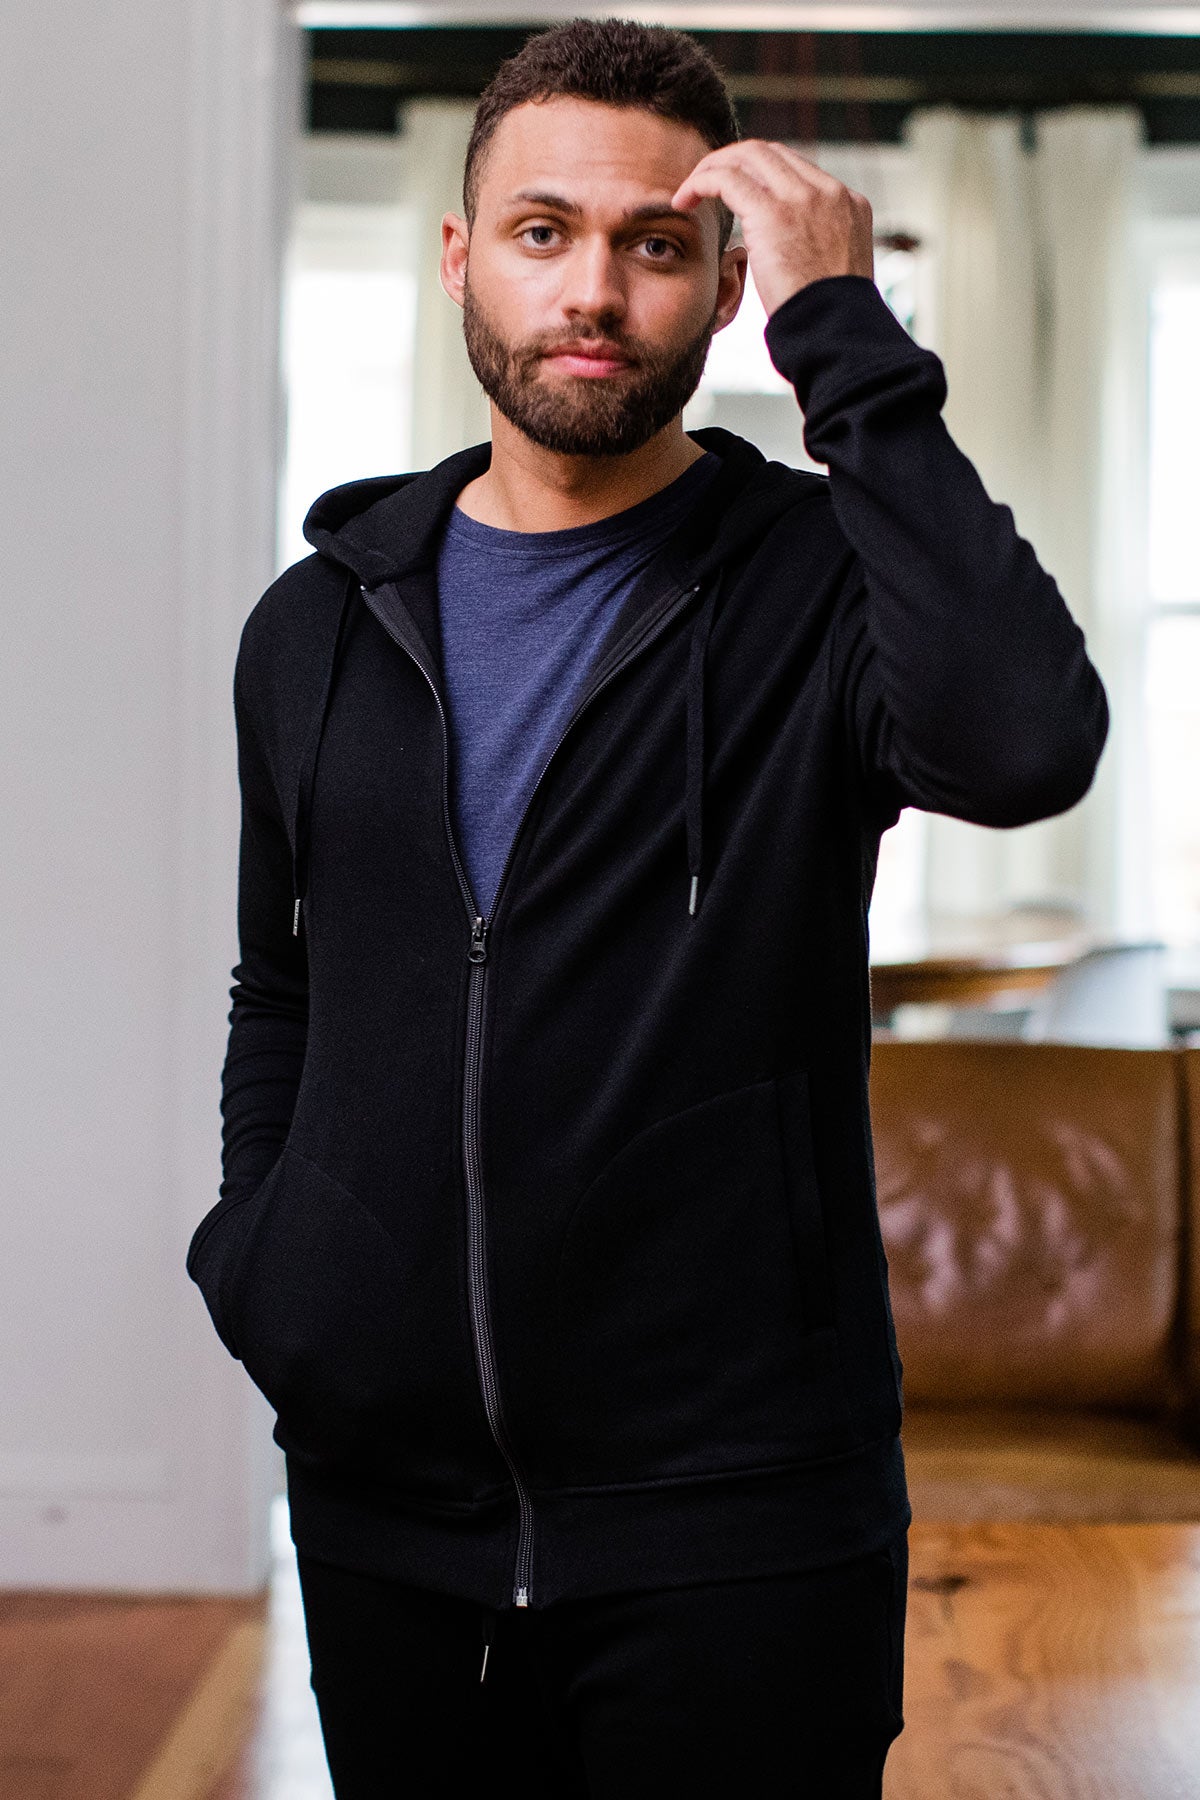 A man standing with one hand in his pocket and the other raised to his head, wearing Yala Joey Men's Zip-Up Bamboo and Organic Cotton Sweatshirt Hooded Jacket in Black